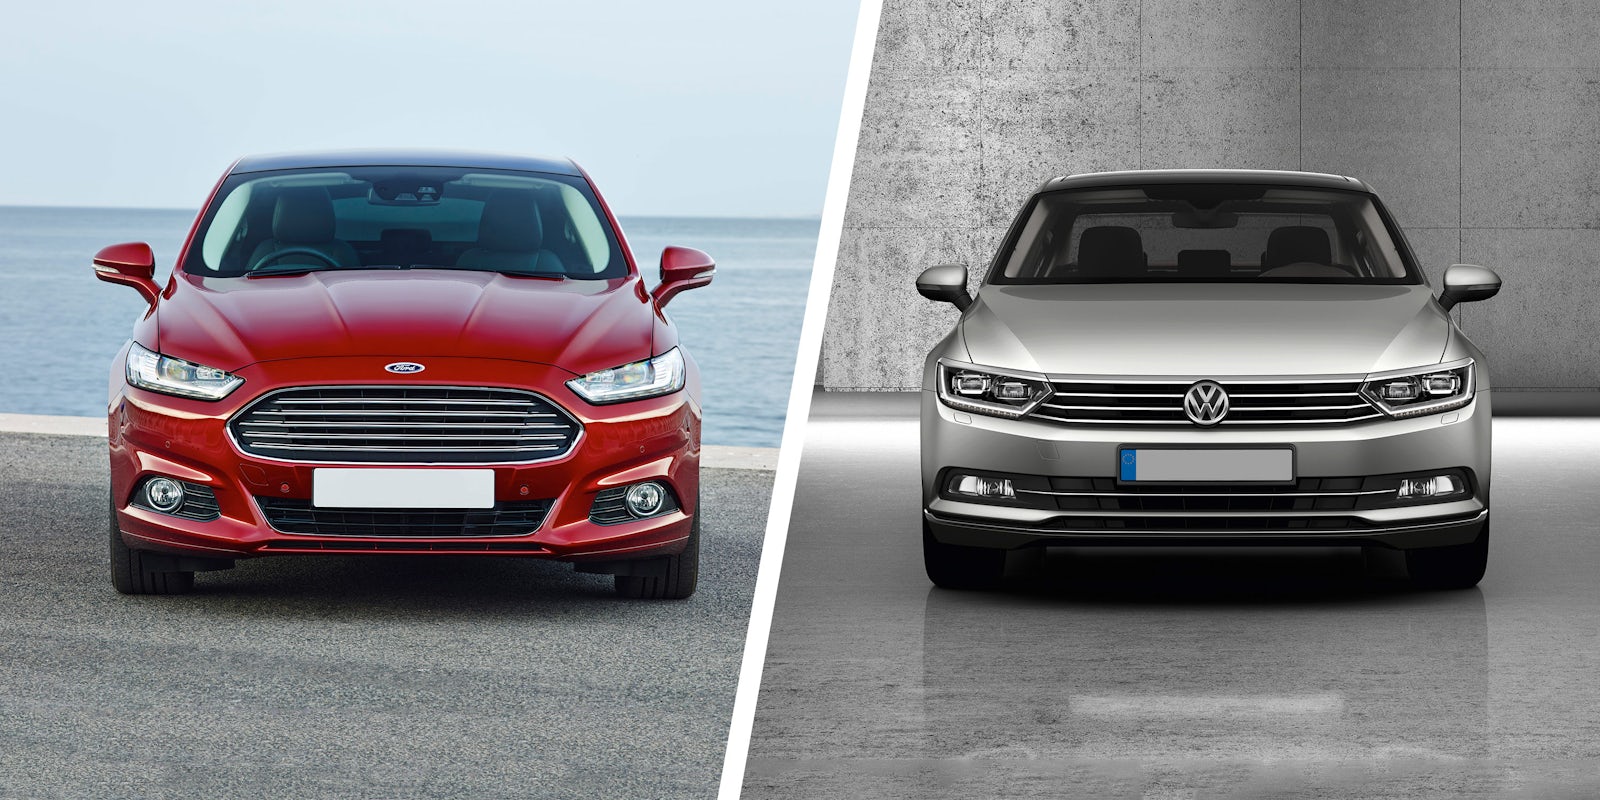 Ford Mondeo vs VW Passat family cars compared